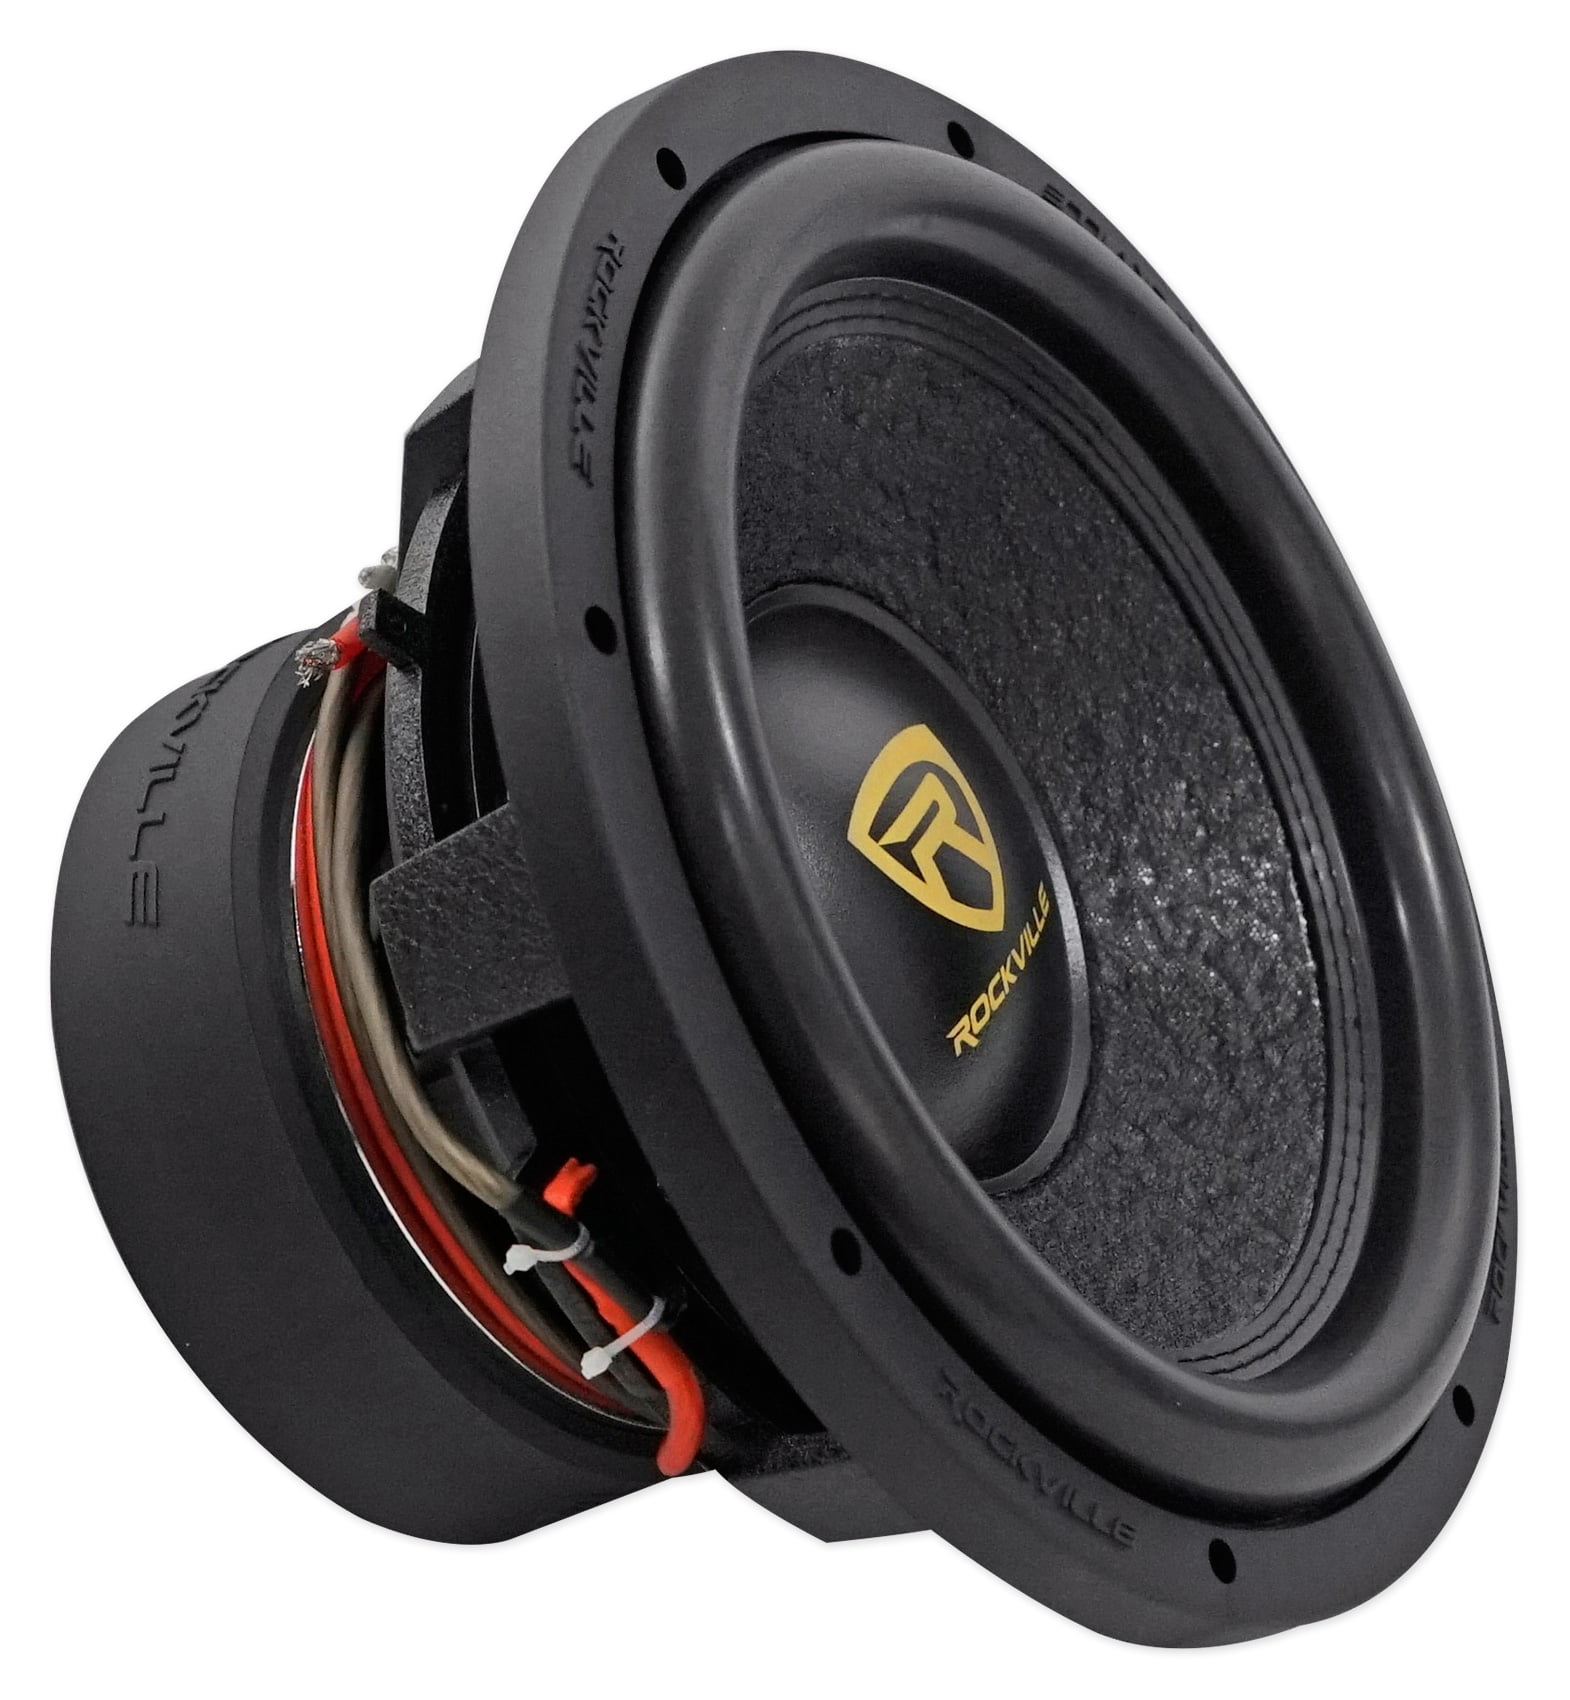 Car Subwoofers: Enhancing Your Listening Experience - Rijal's Blog